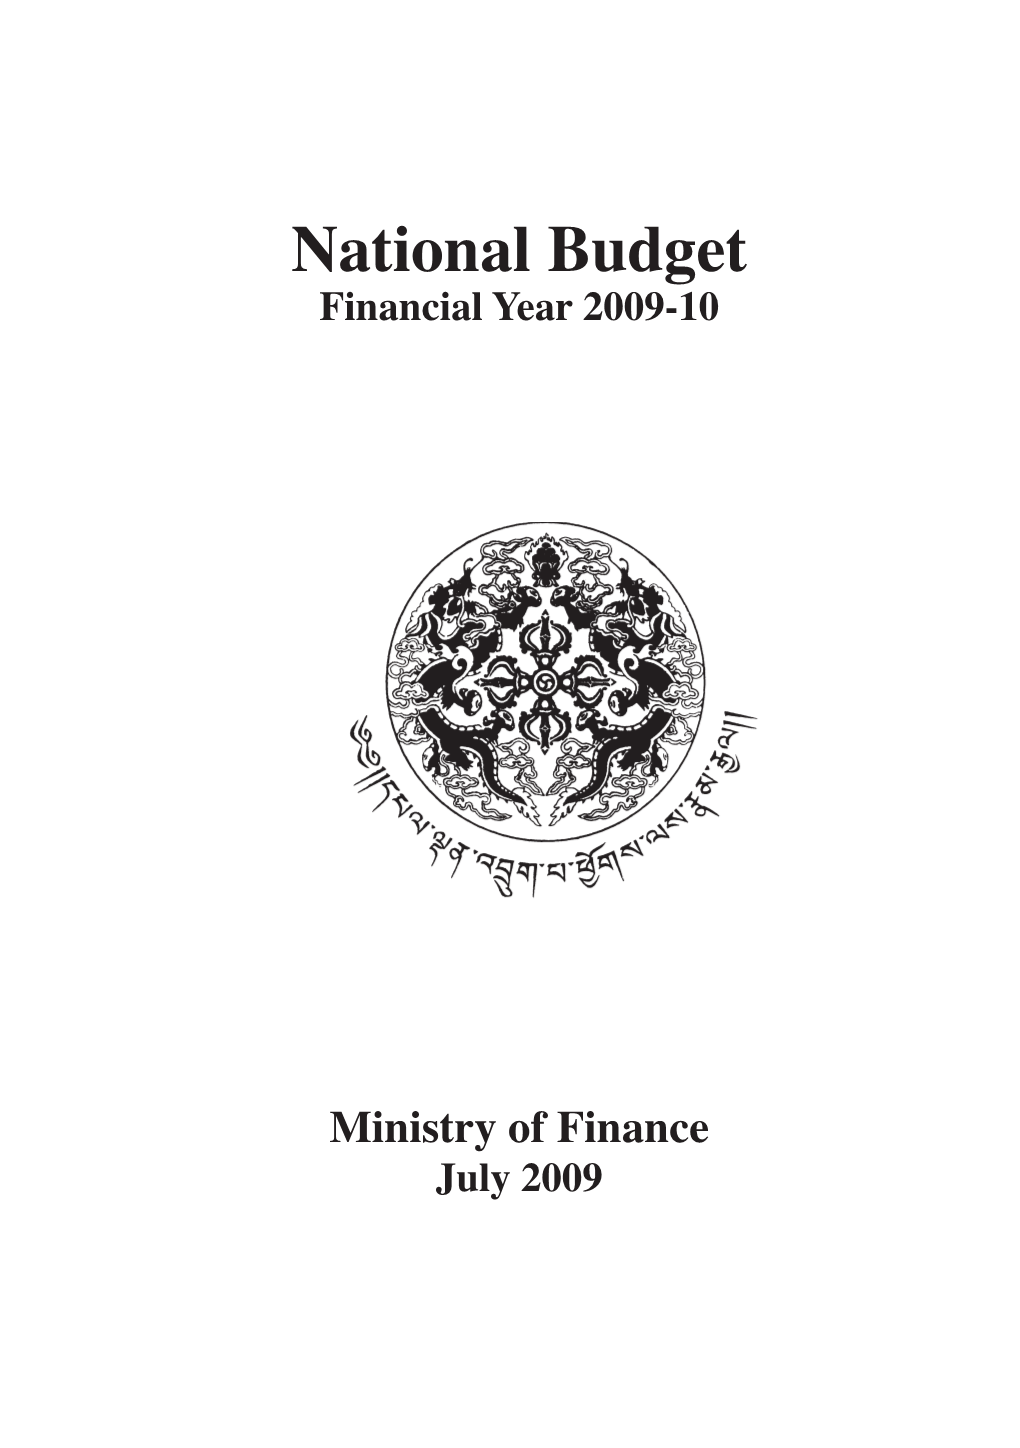 National Budget Financial Year 2009-10